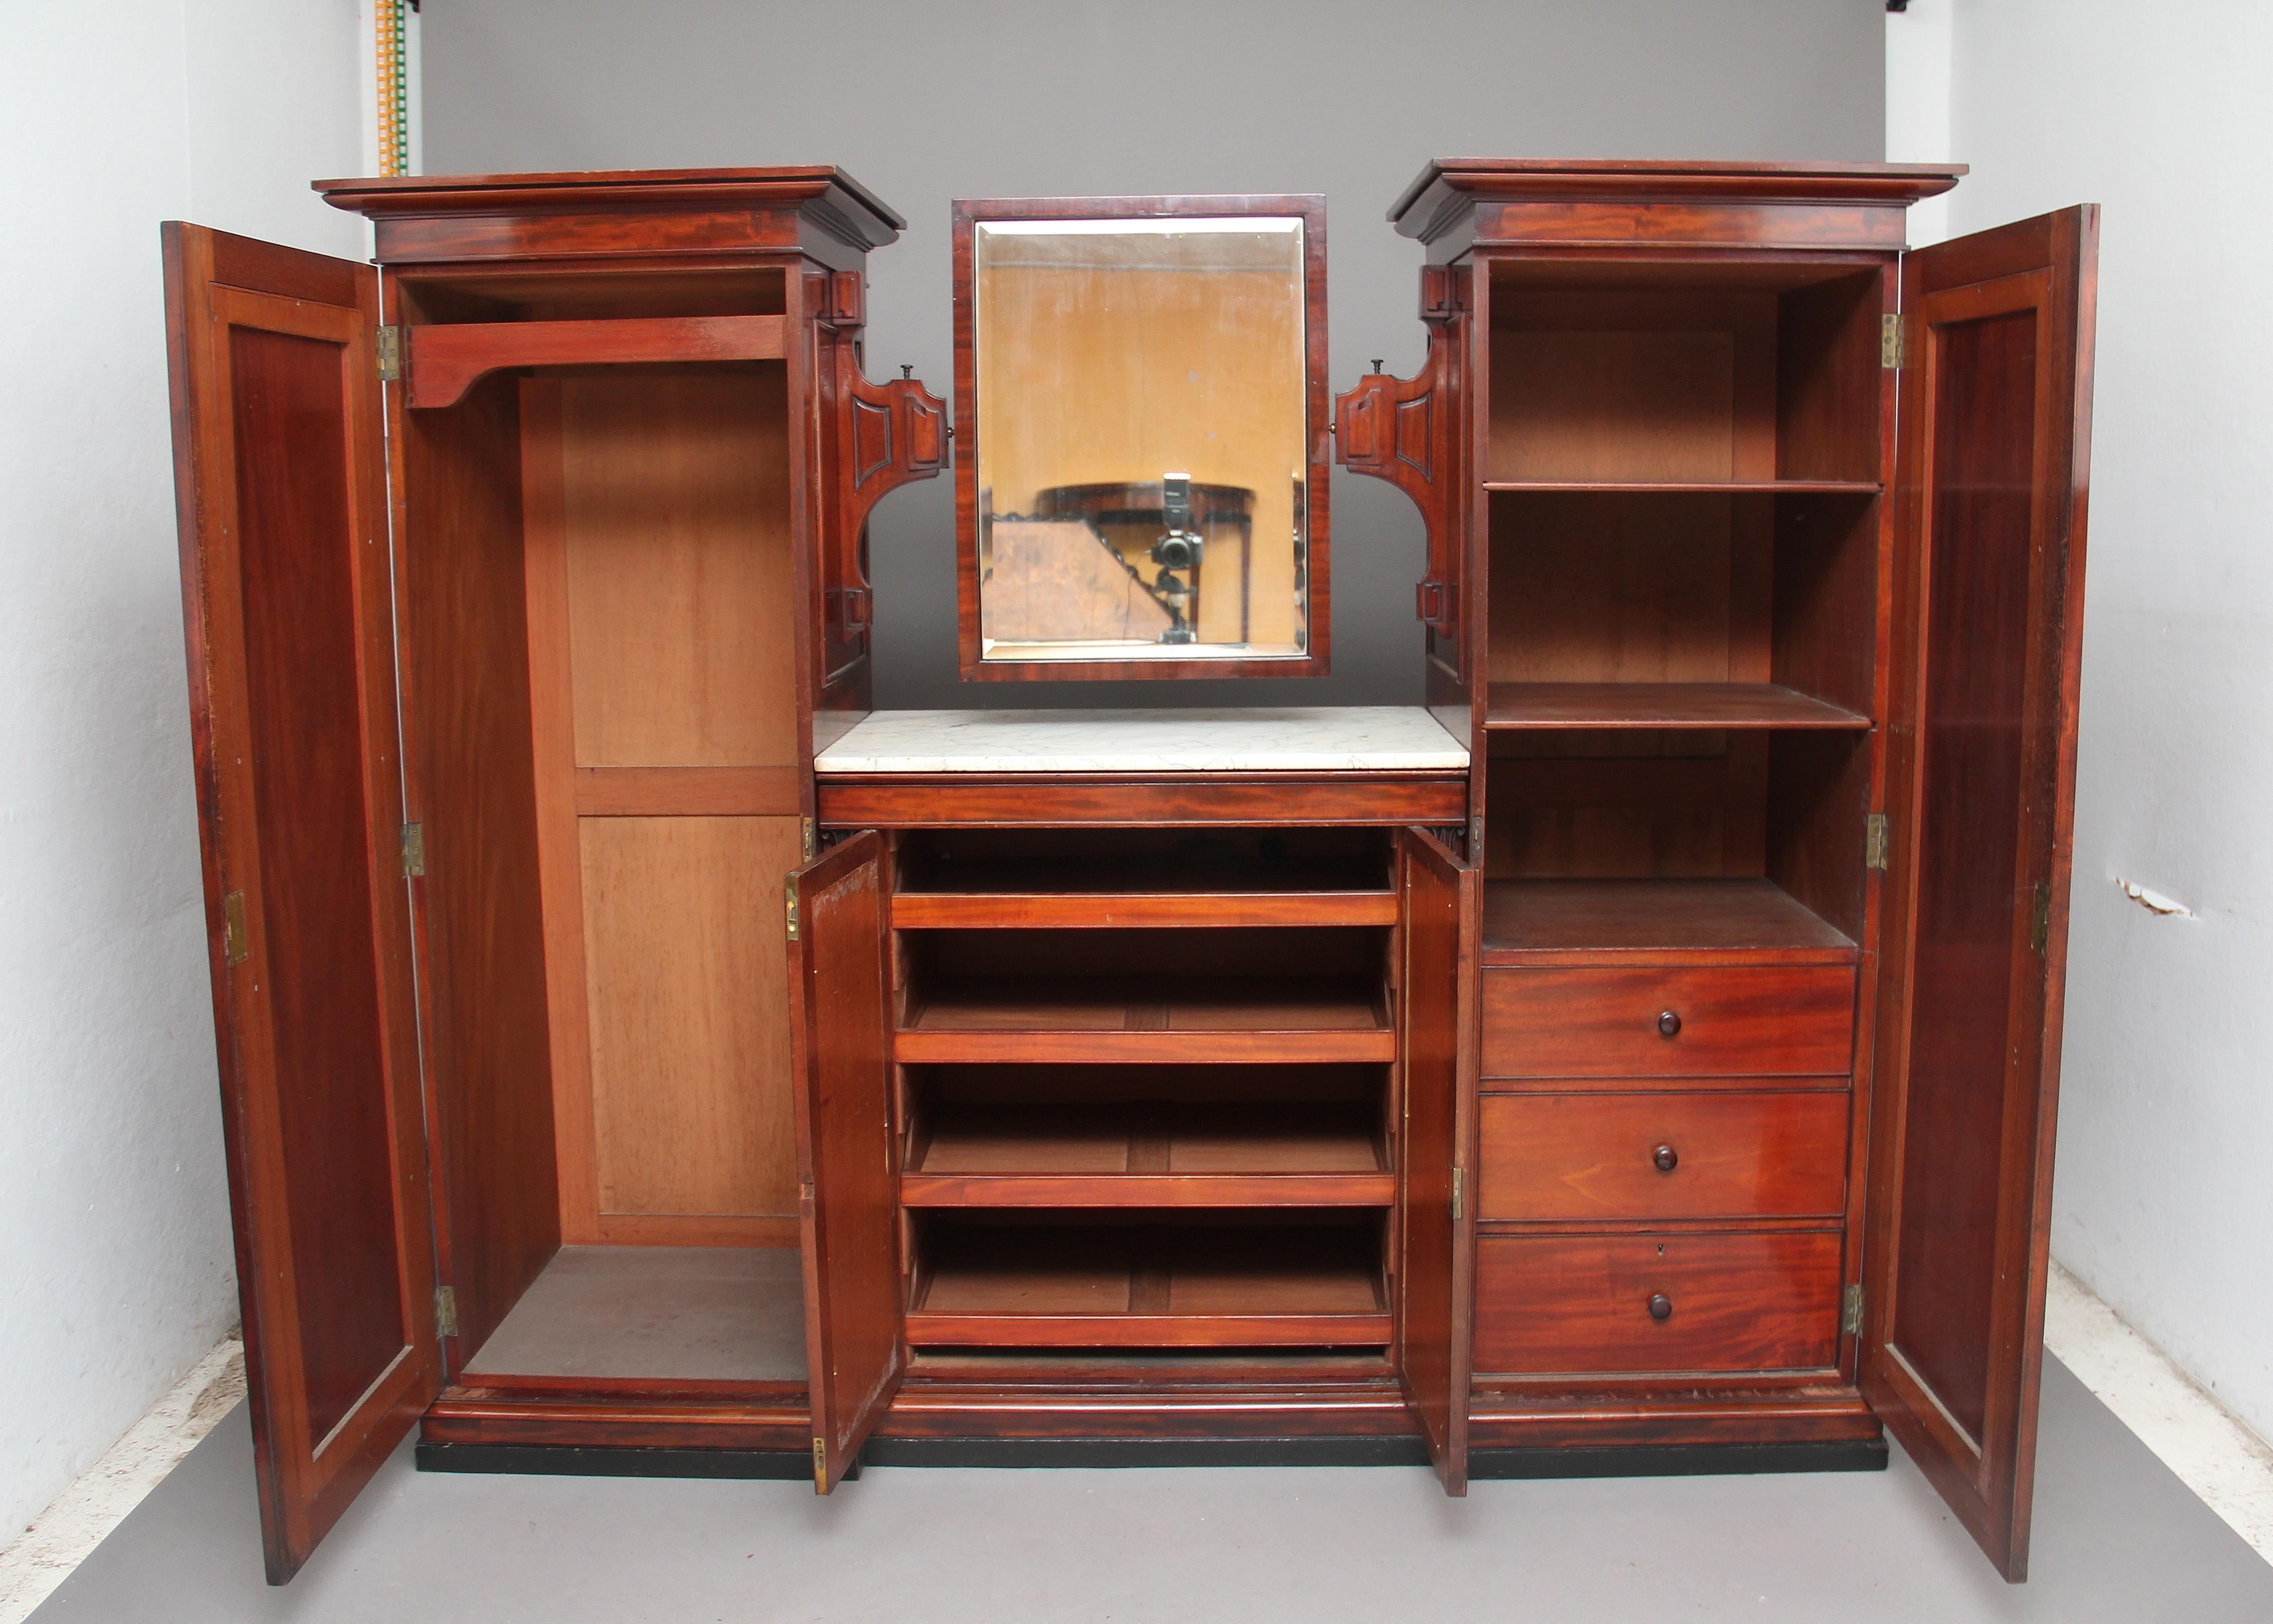 19th century mahogany wardrobe of nice proportions with a door at either end, opening to reveal on the left side full hanging space and on the right three drawers and three shelves, between these are a pair of doors with four sliding trays with a